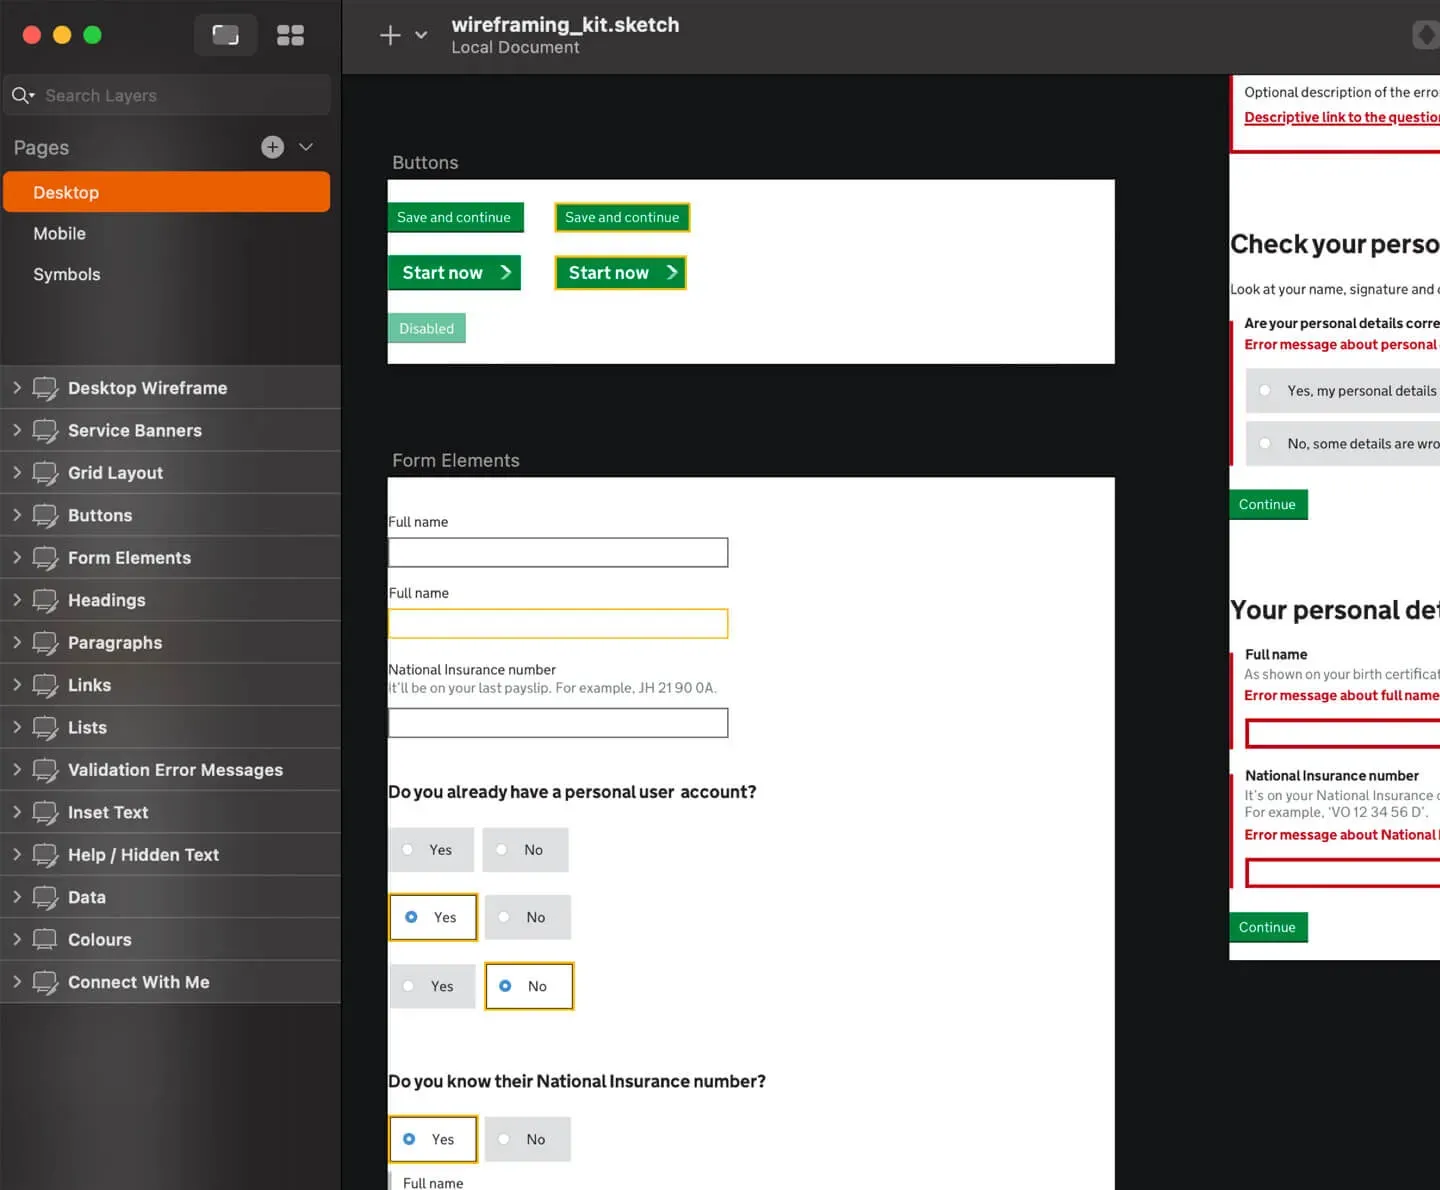 A screenshot of version 1 of the GOV.UK Wireframing Kit for Sketch. It shows a collection of elements such as inputs and radios. They are scaled for desktop screens.